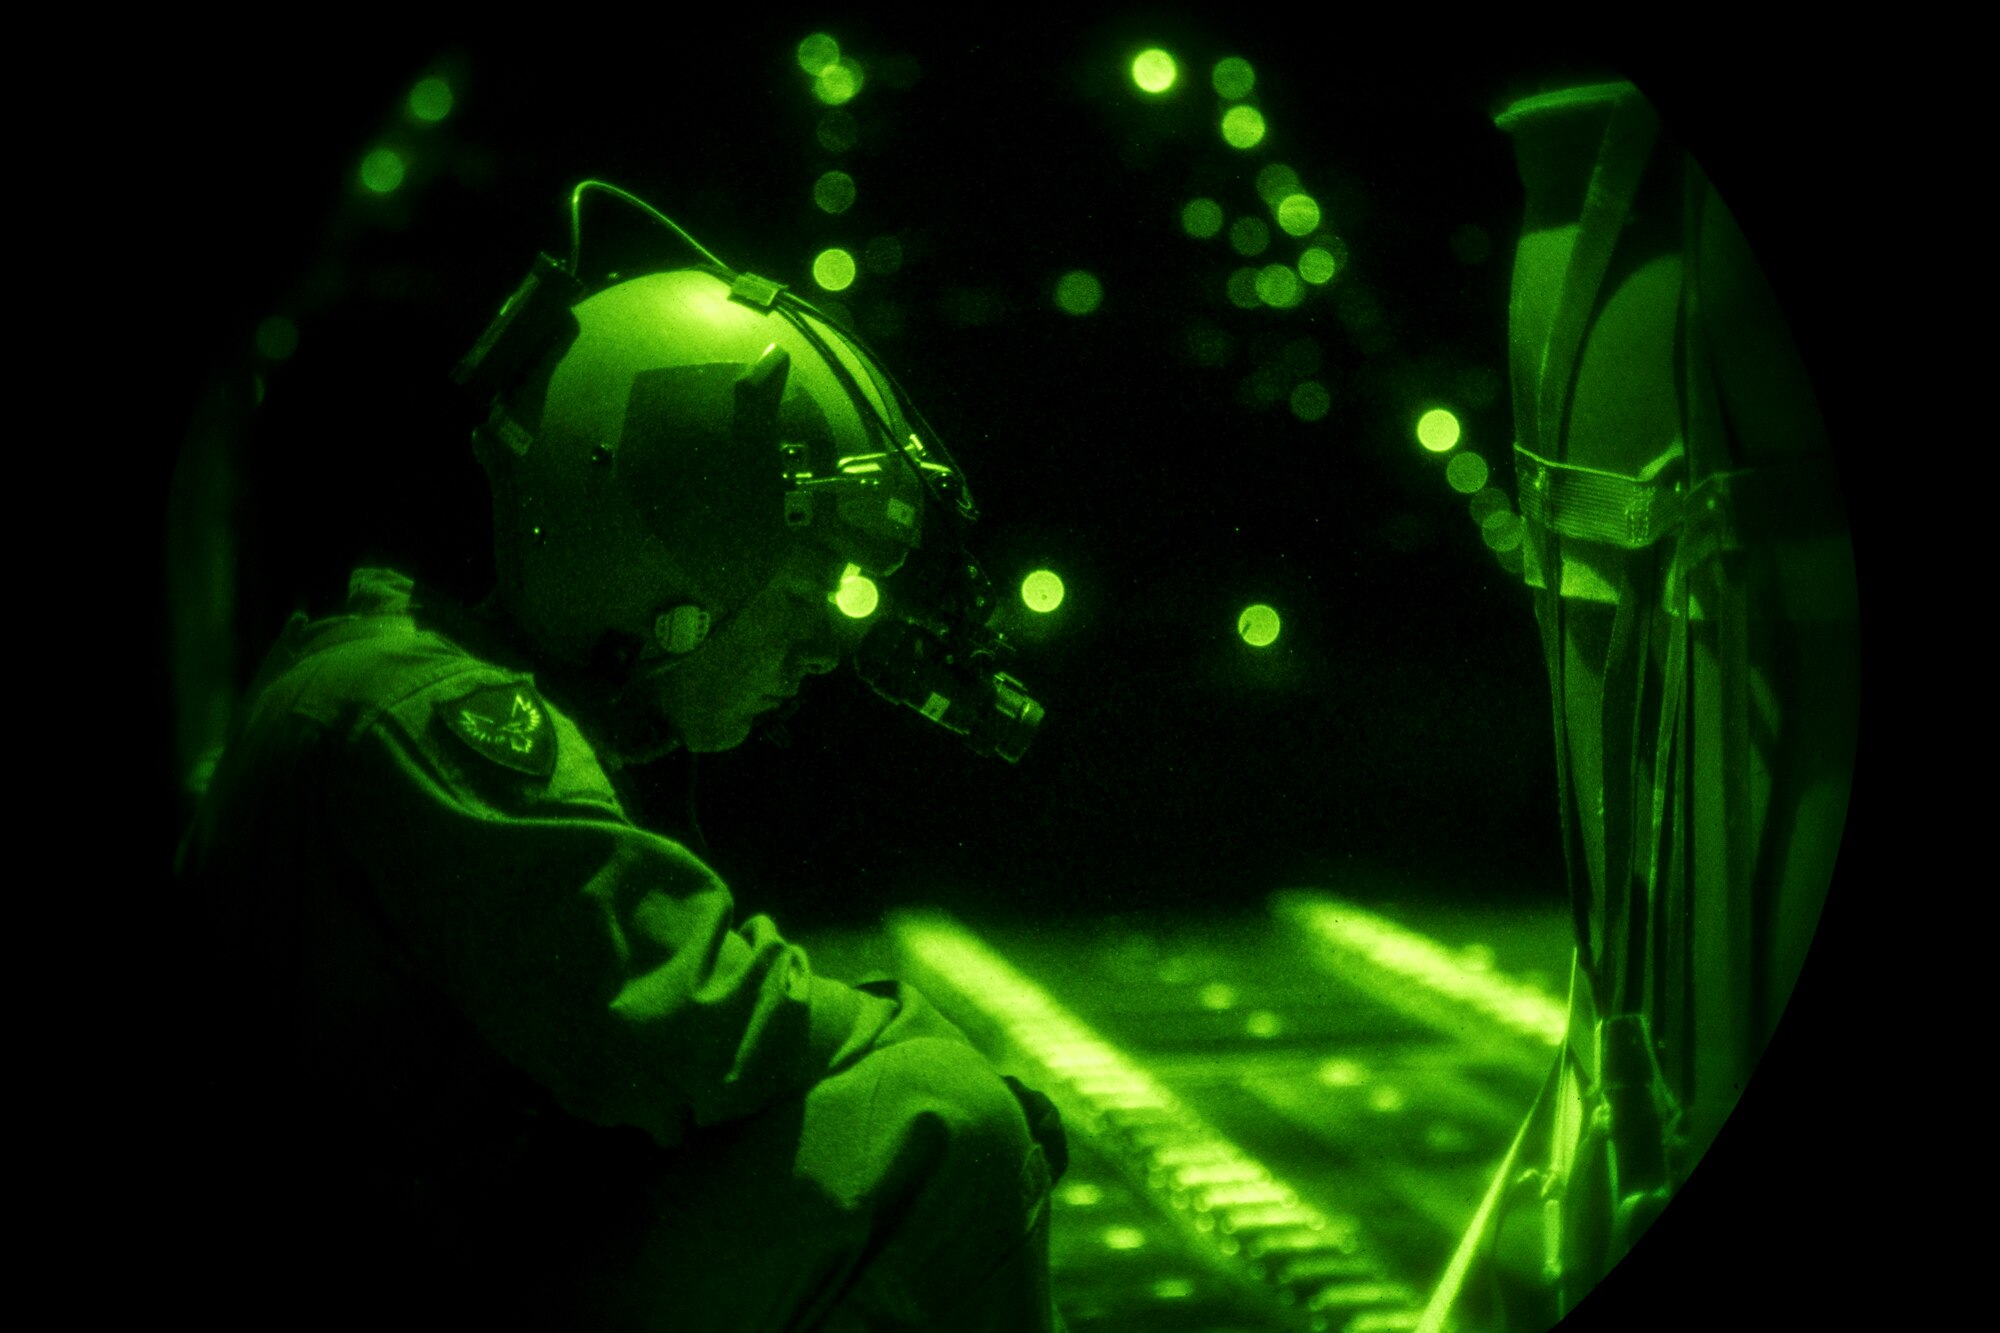 A U.S. Air Force loadmaster assigned to the 37th Airlift Squadron prepares to cut the restraints of a container delivery system to airdrop it from a C-130J Super Hercules over Romania, Aug. 28, 2018. The night operation was part of Carpathian Summer 2018, a bilateral training exercise designed to enhance interoperability and readiness of forces by conducting combined air operations with the Romanian air force. (U.S. Air Force photo by Senior Airman Devin Boyer)